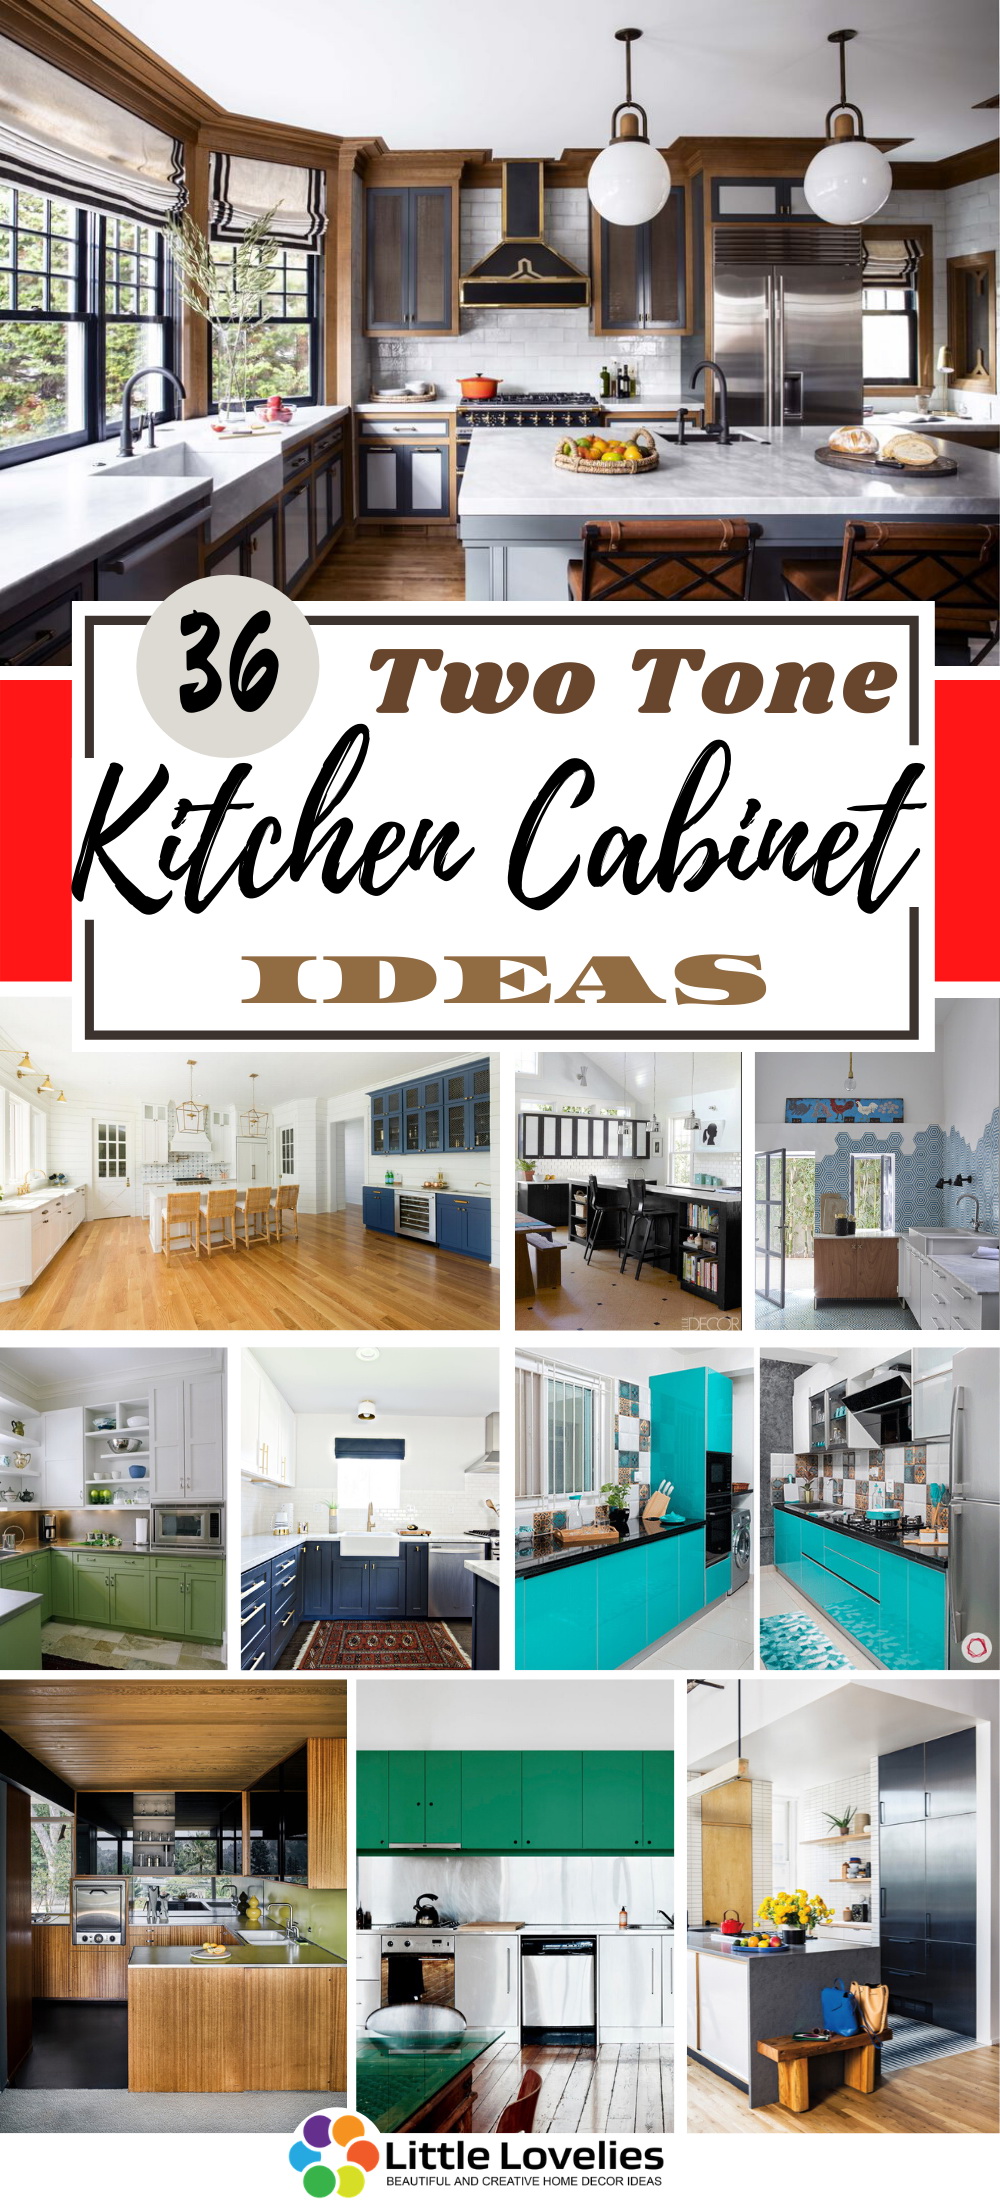 20 Fabulous Two Tone Kitchen Cabinet Ideas To Bring Colour In Your ...